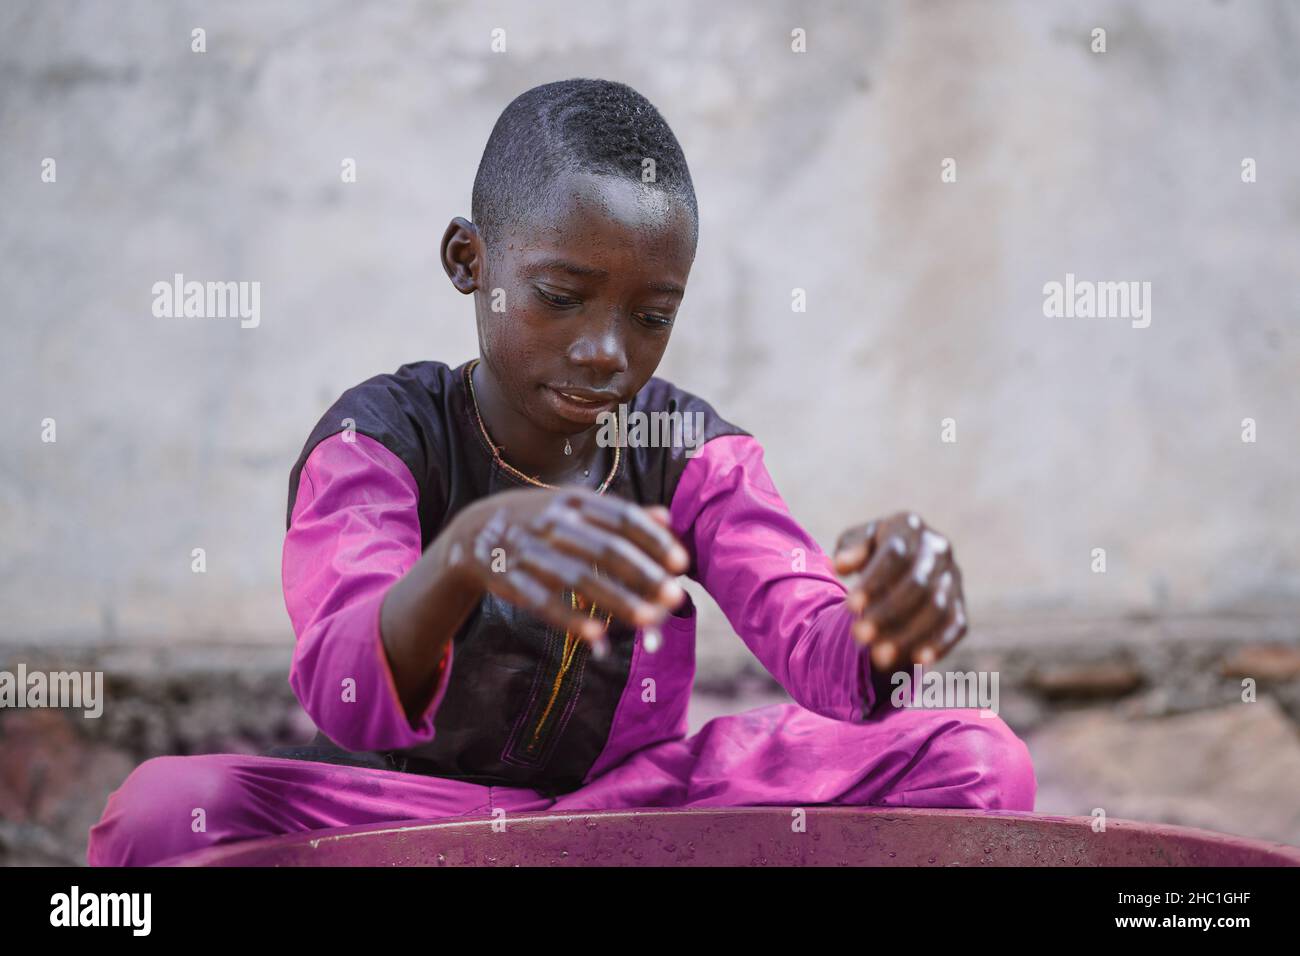 Cute black African boy sitting cross-legged in front of a plastic bathtub staring mesmerized at his reflection on the surface of the water, while drop Stock Photo